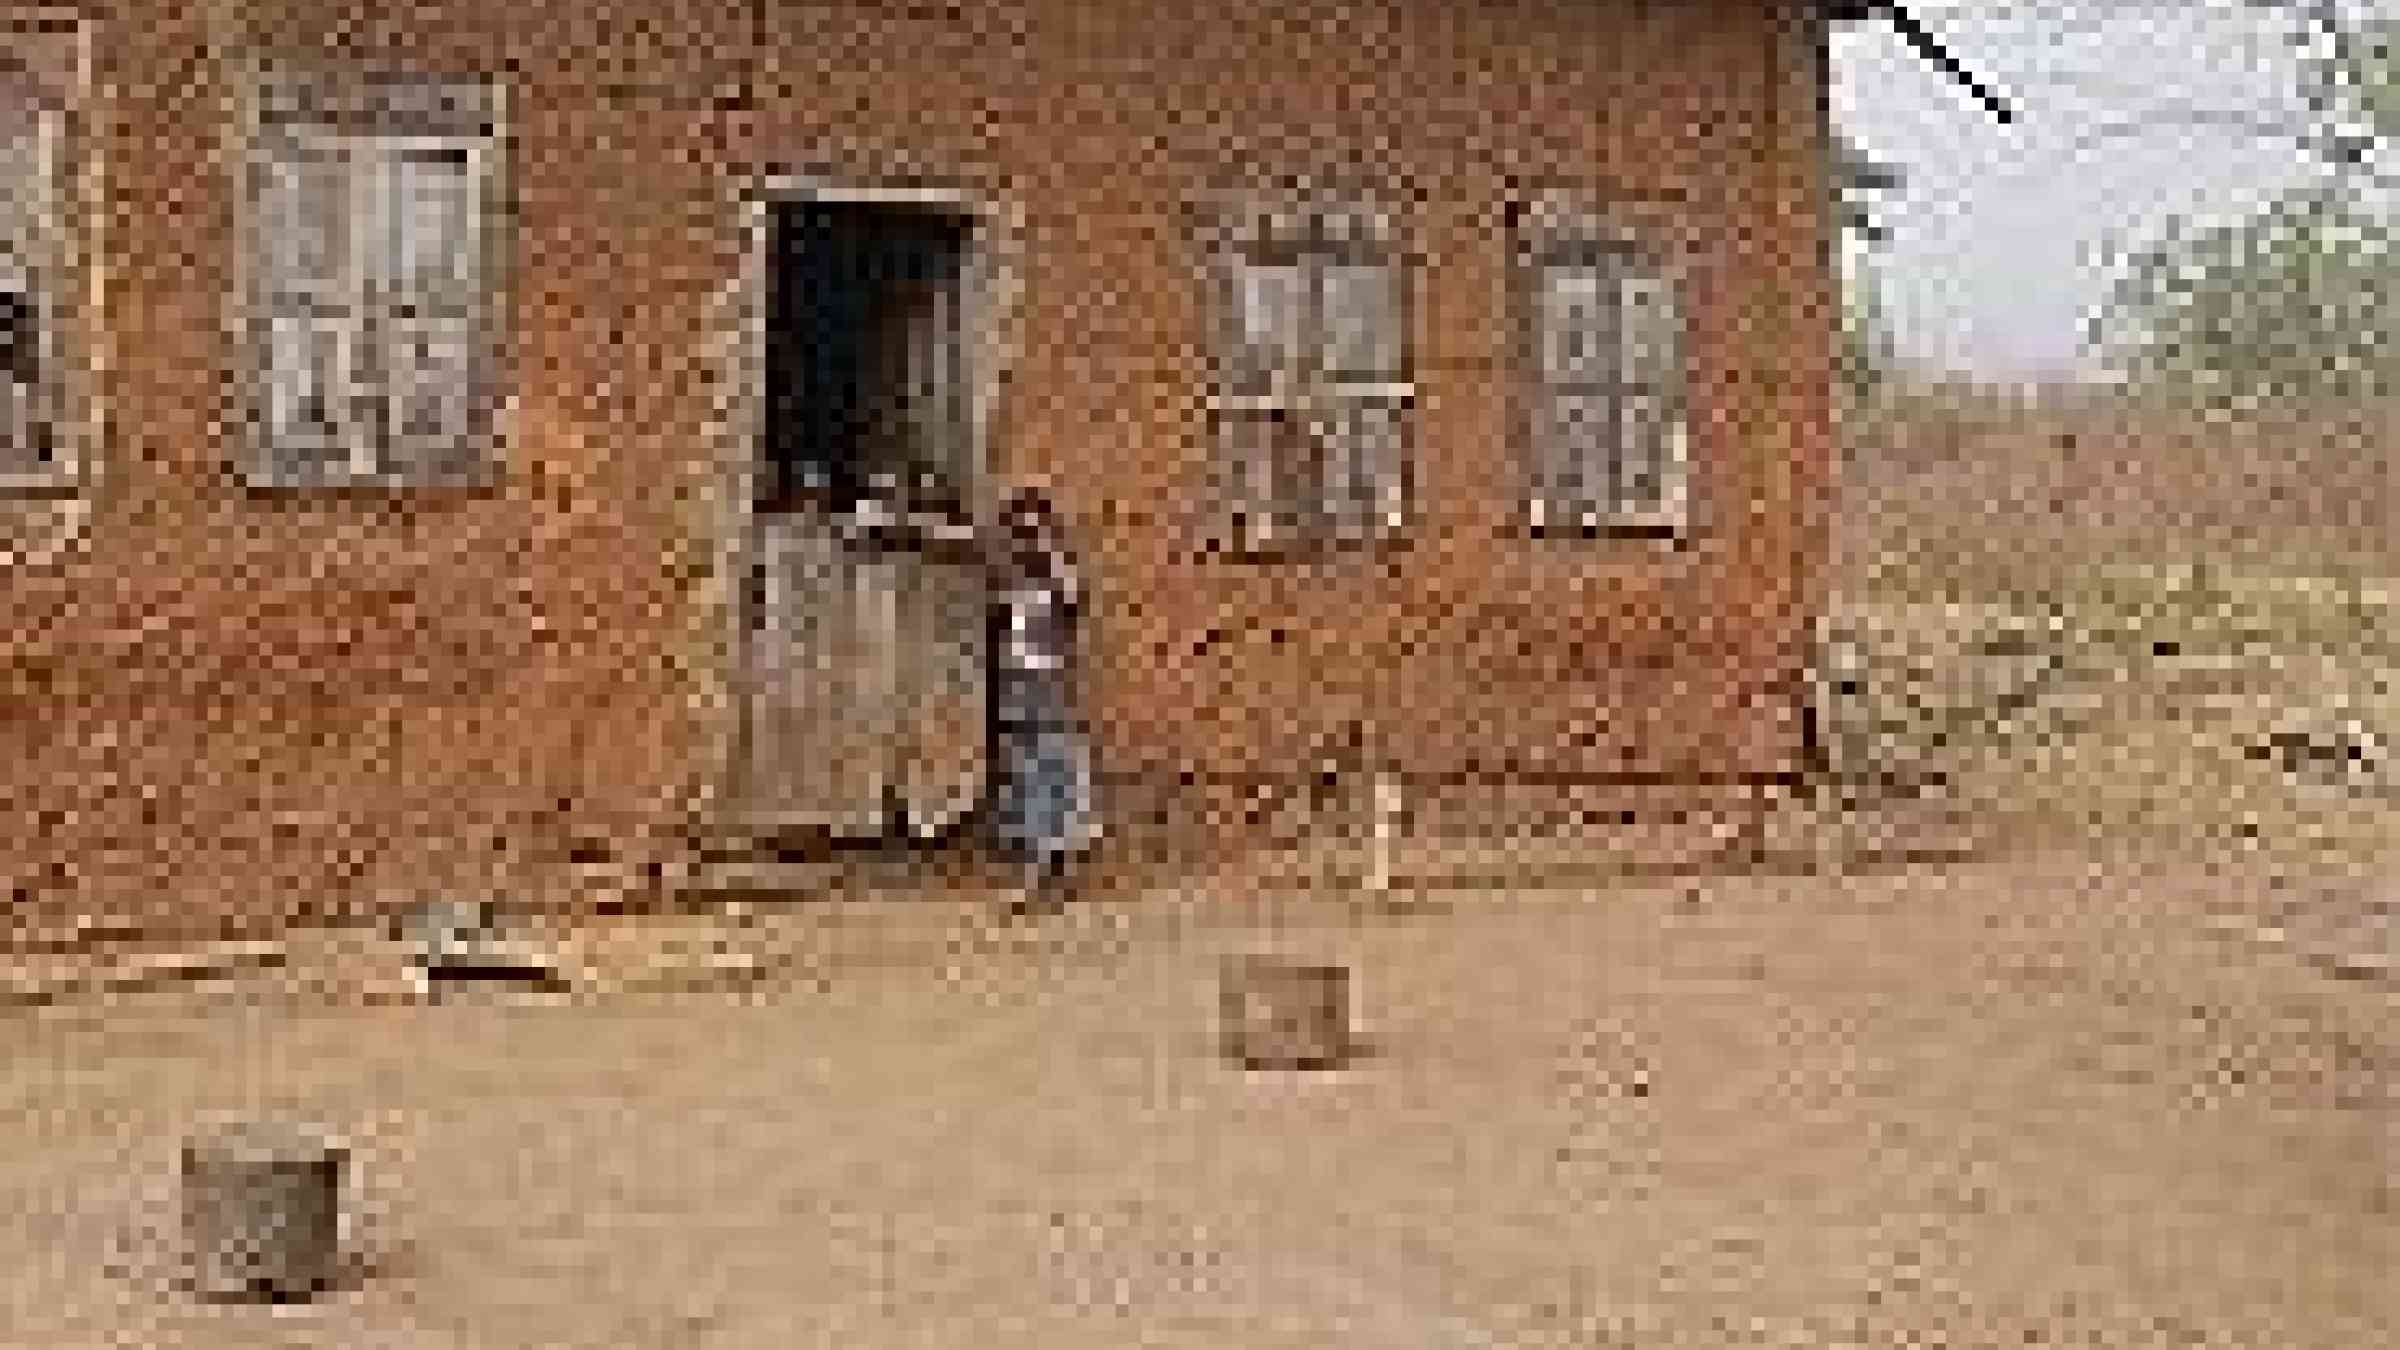 Photo of children in front of a mud house in Nigeria by Flickr user, IITA image library, Creative Commons Attribution 2.0 Generic (CC BY 2.0)